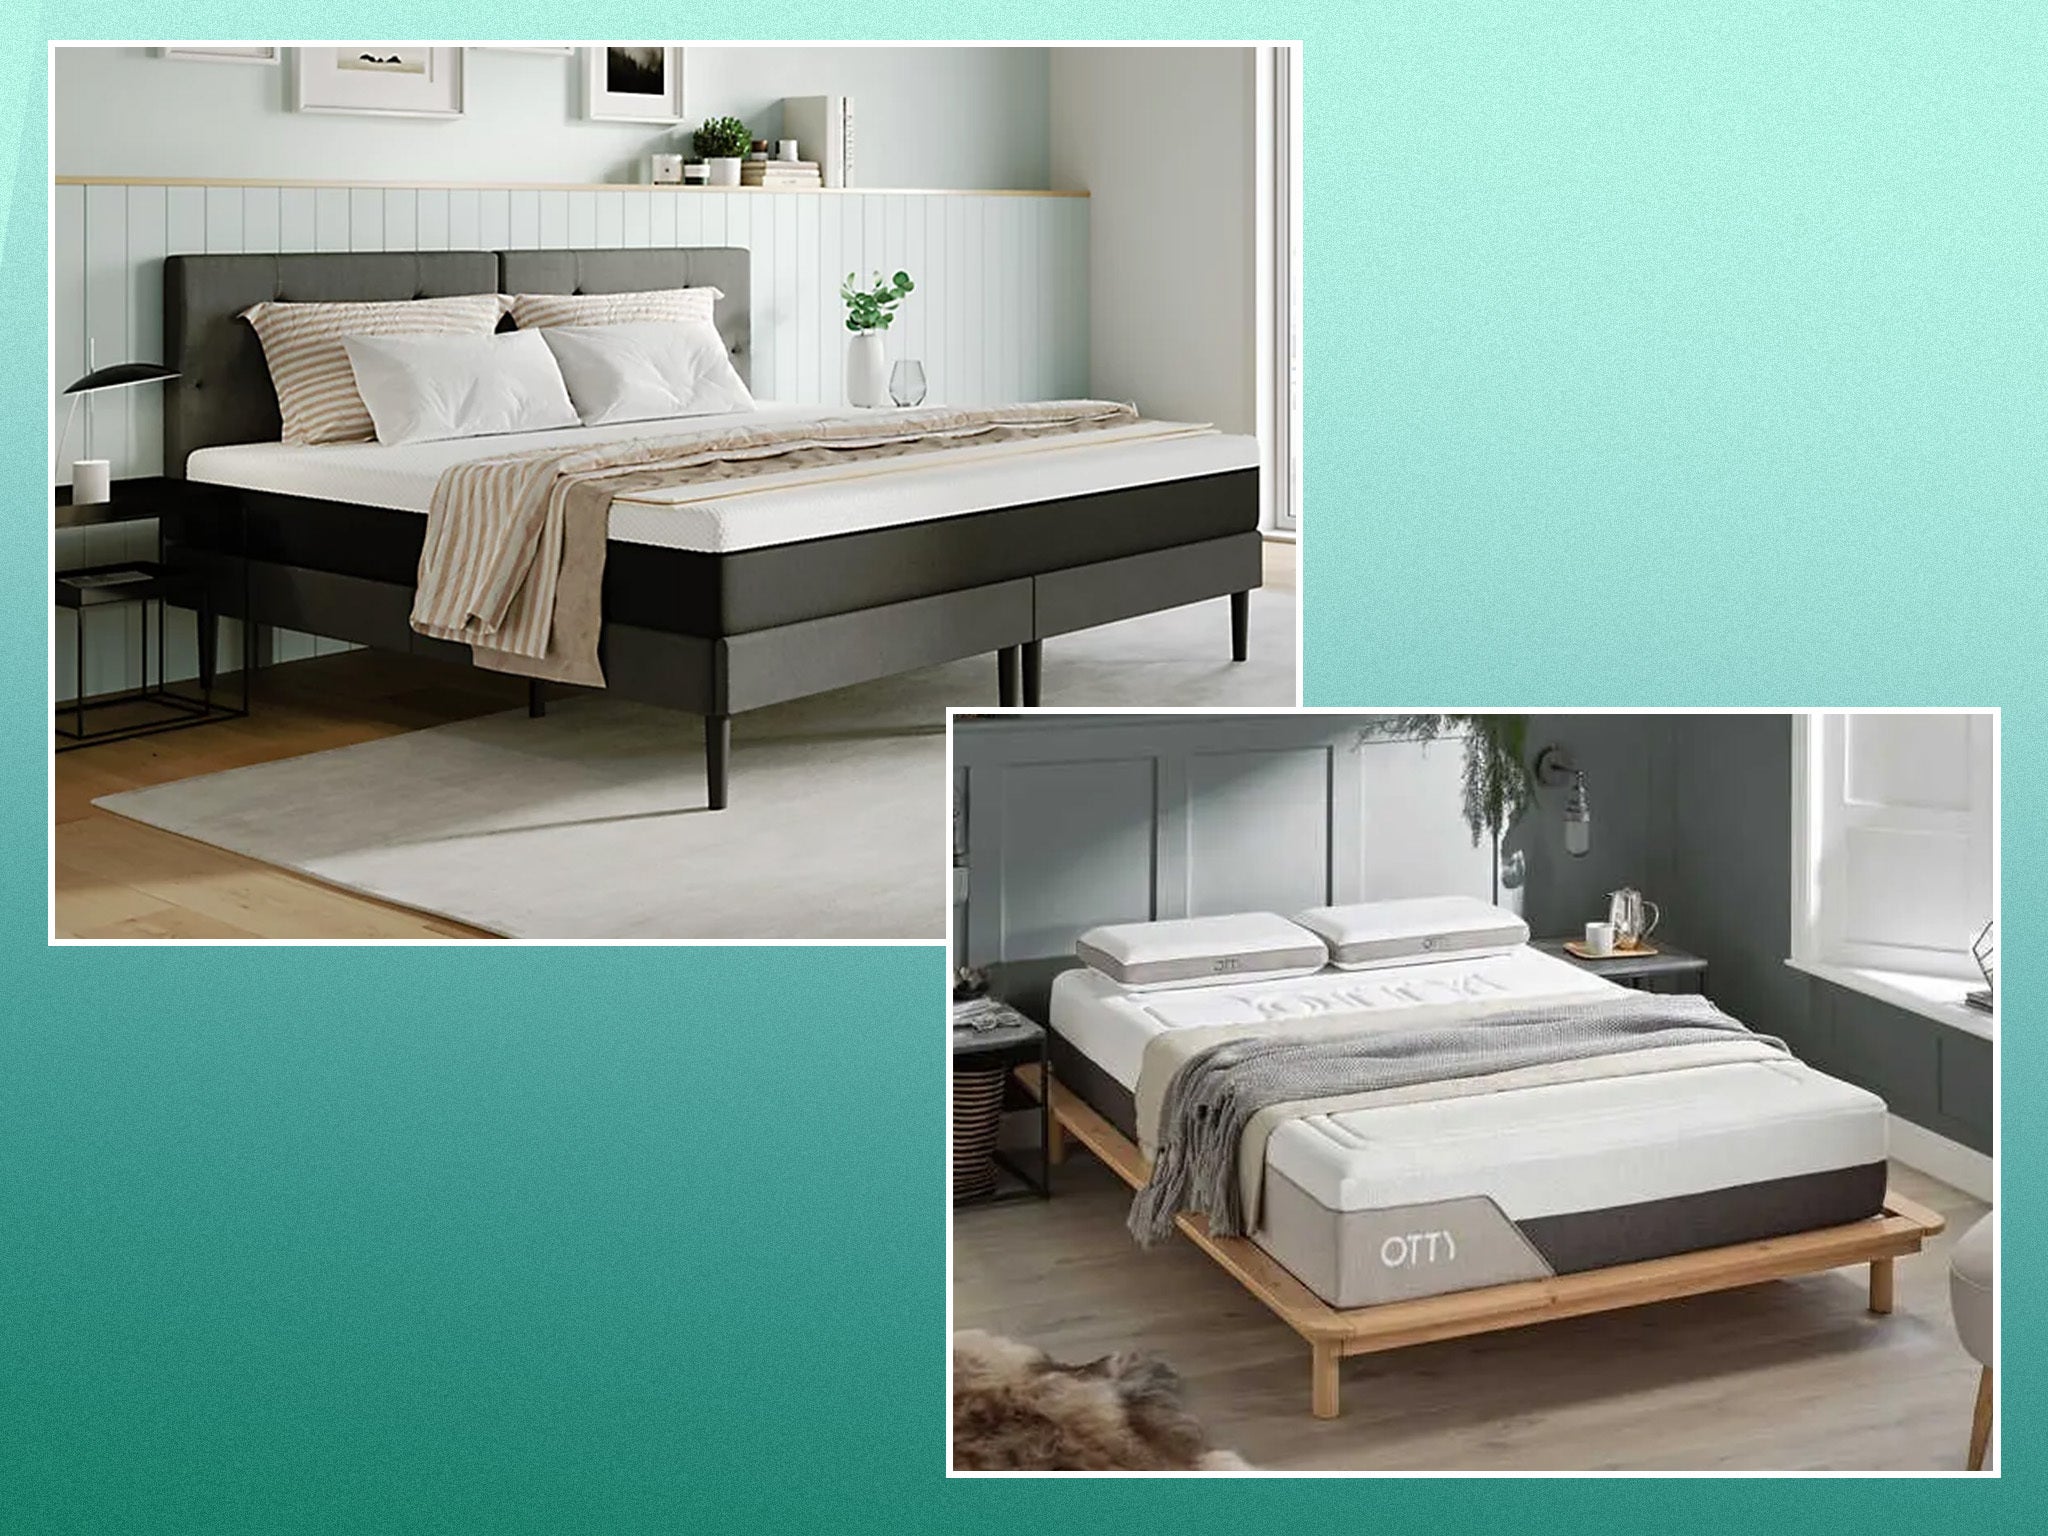 The cheap mattress deals to pick up in the June sales, from double to king size